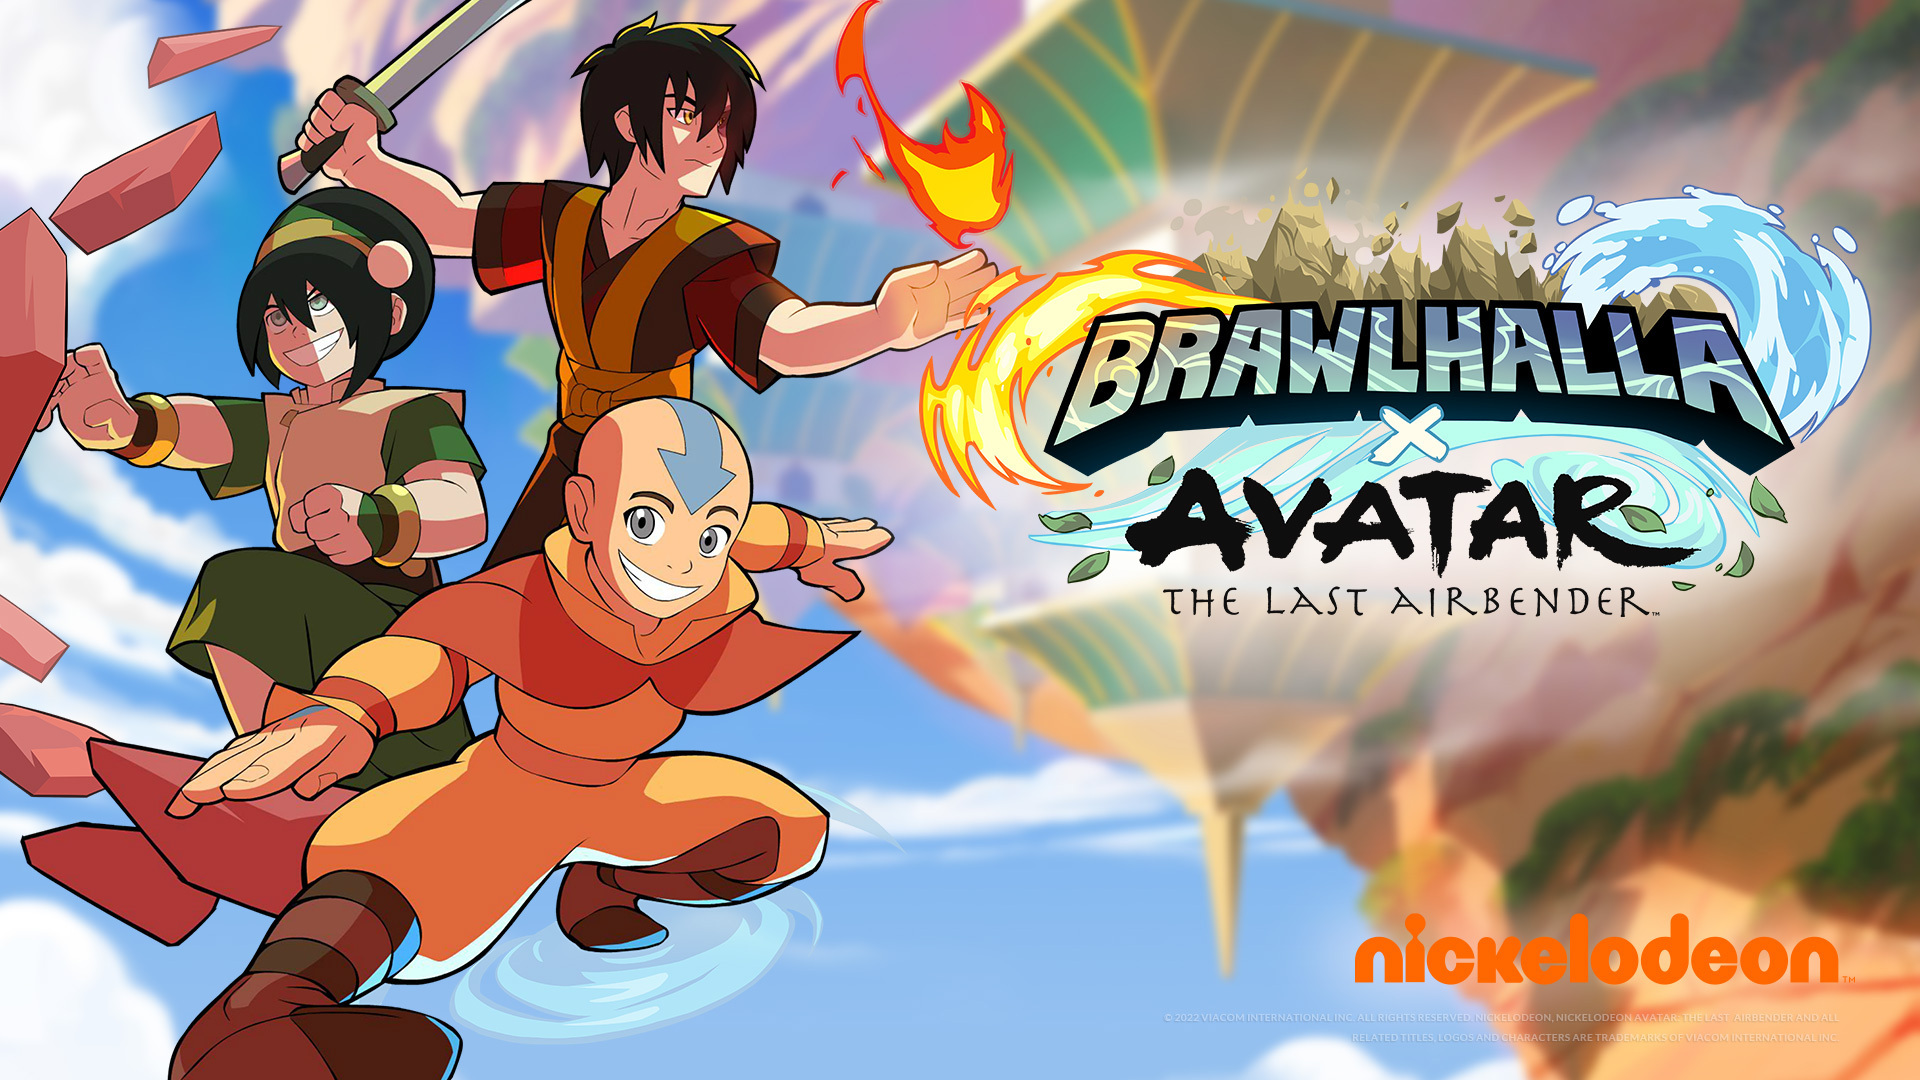 Master the Elements in Brawlhalla x Avatar: The Last Airbender! – Patch 7.01